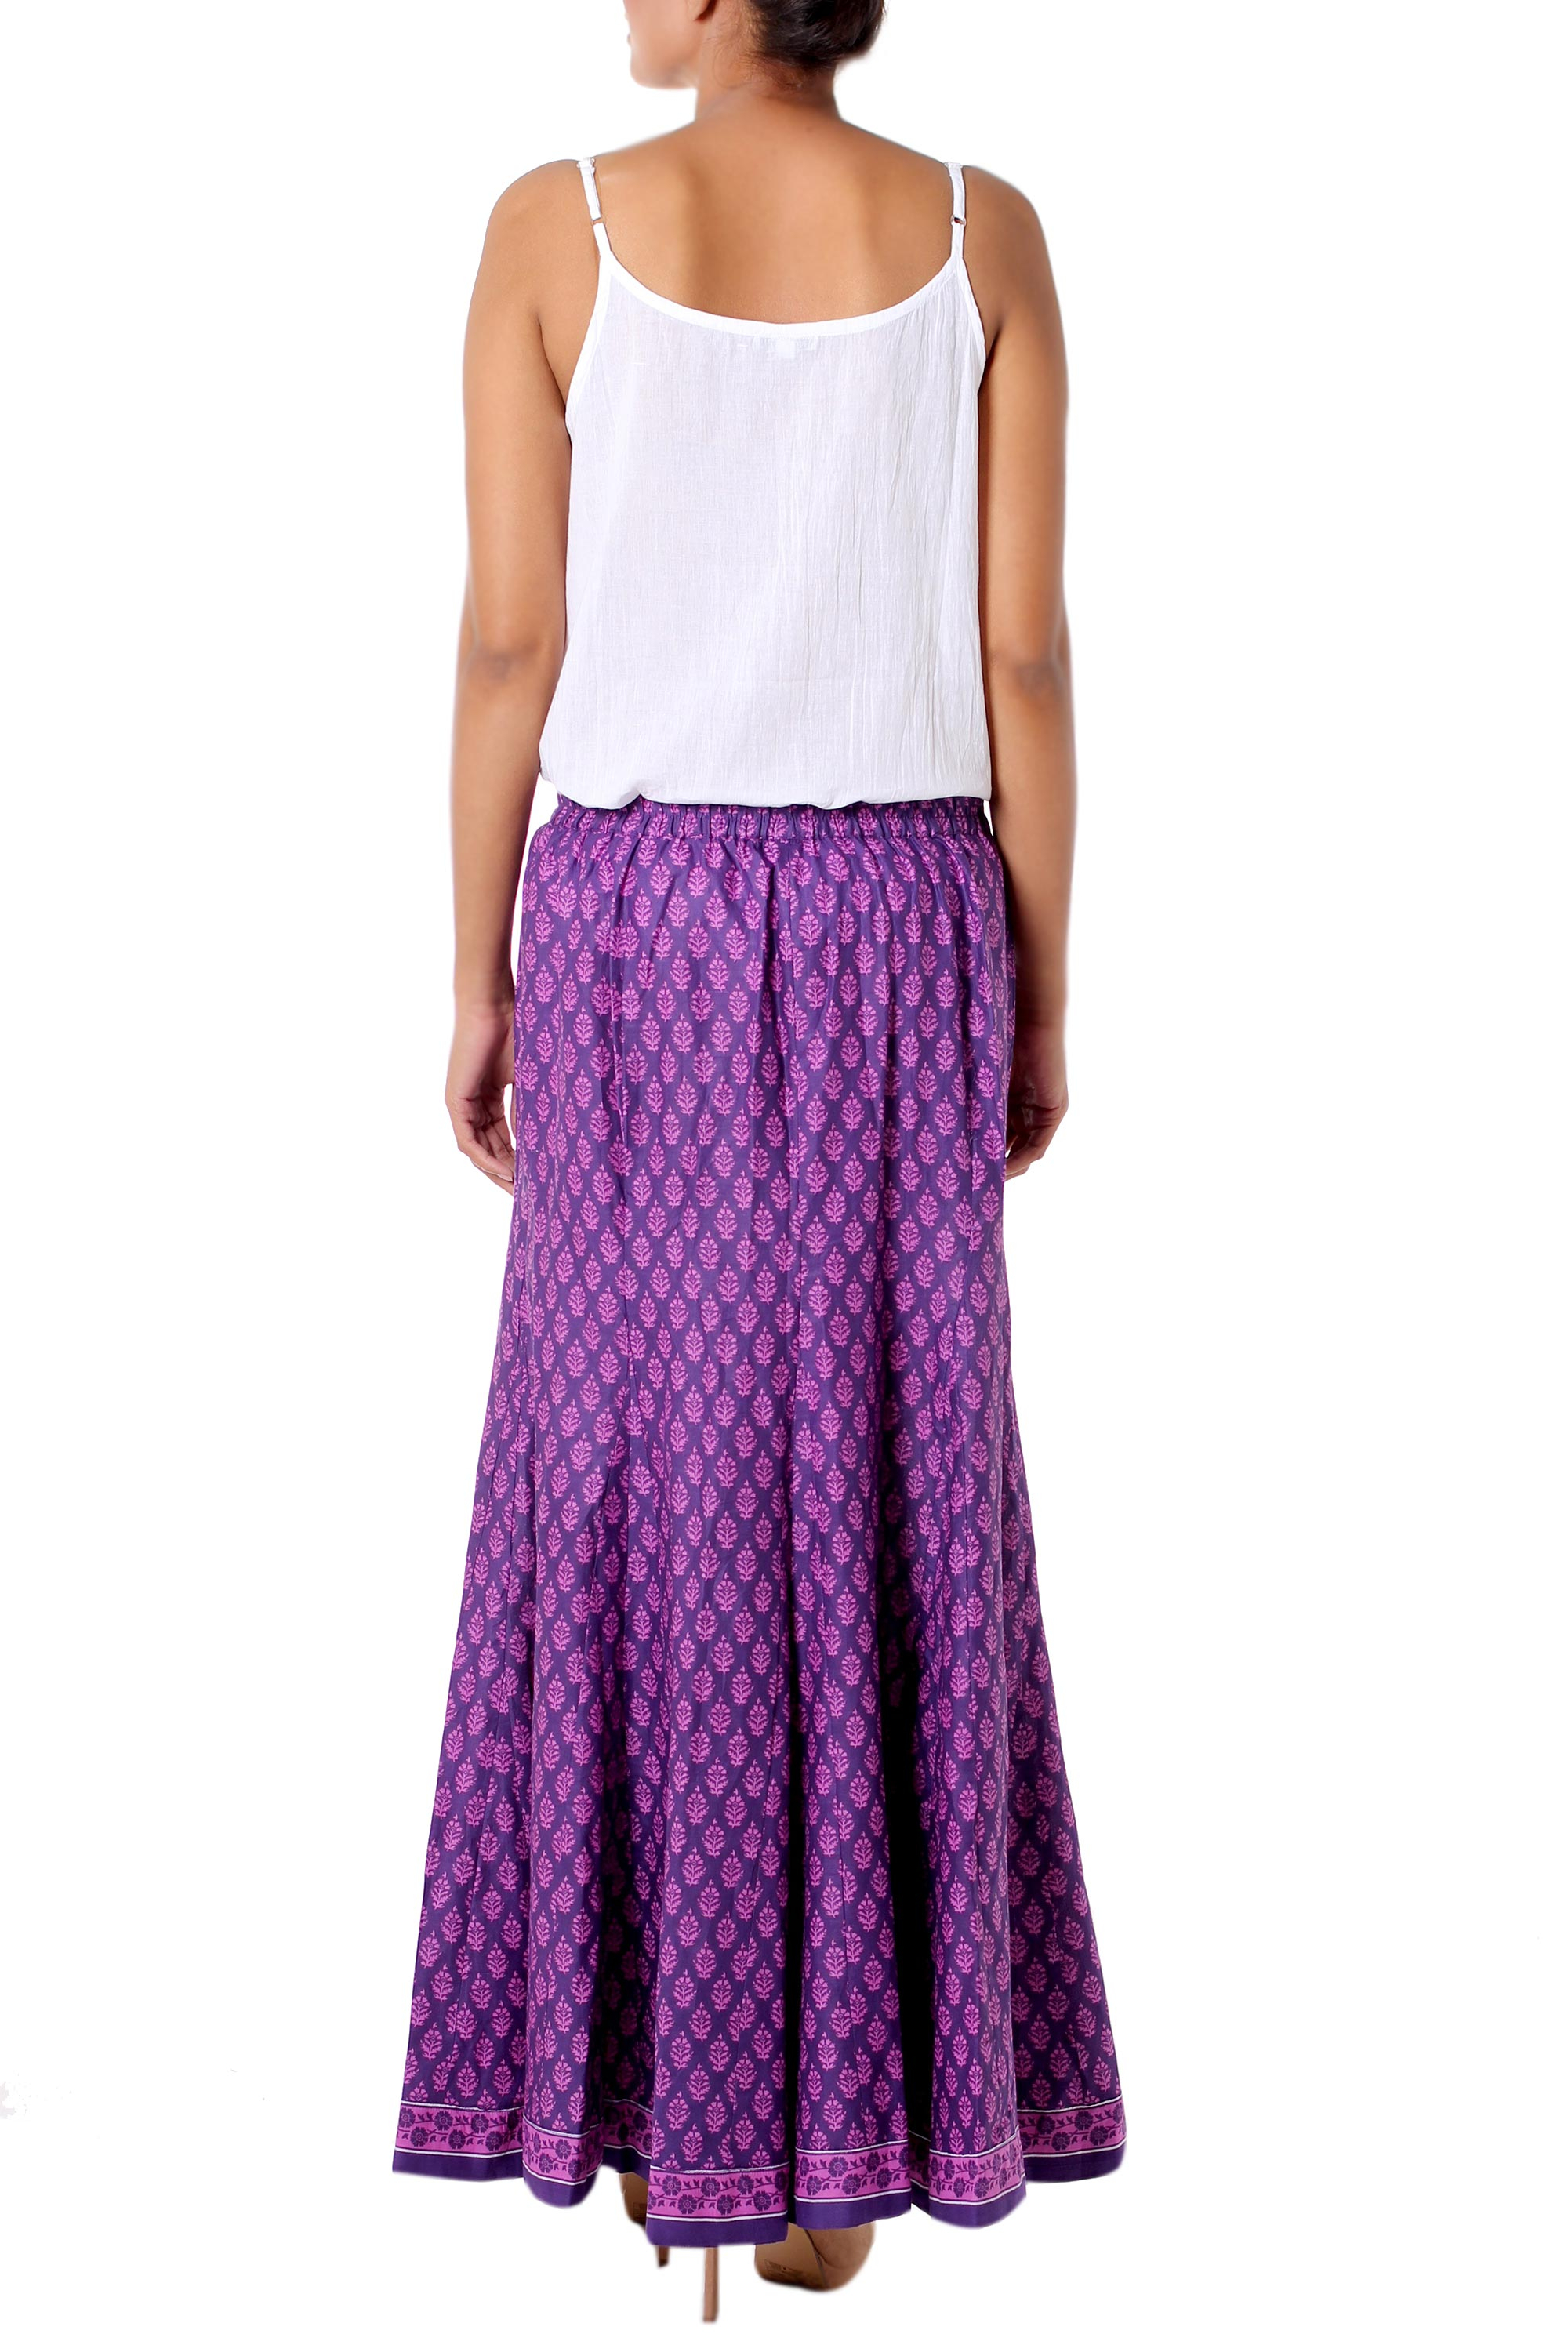 Women's Purple and Lilac Floral Print Long Skirt from India - Radiant ...